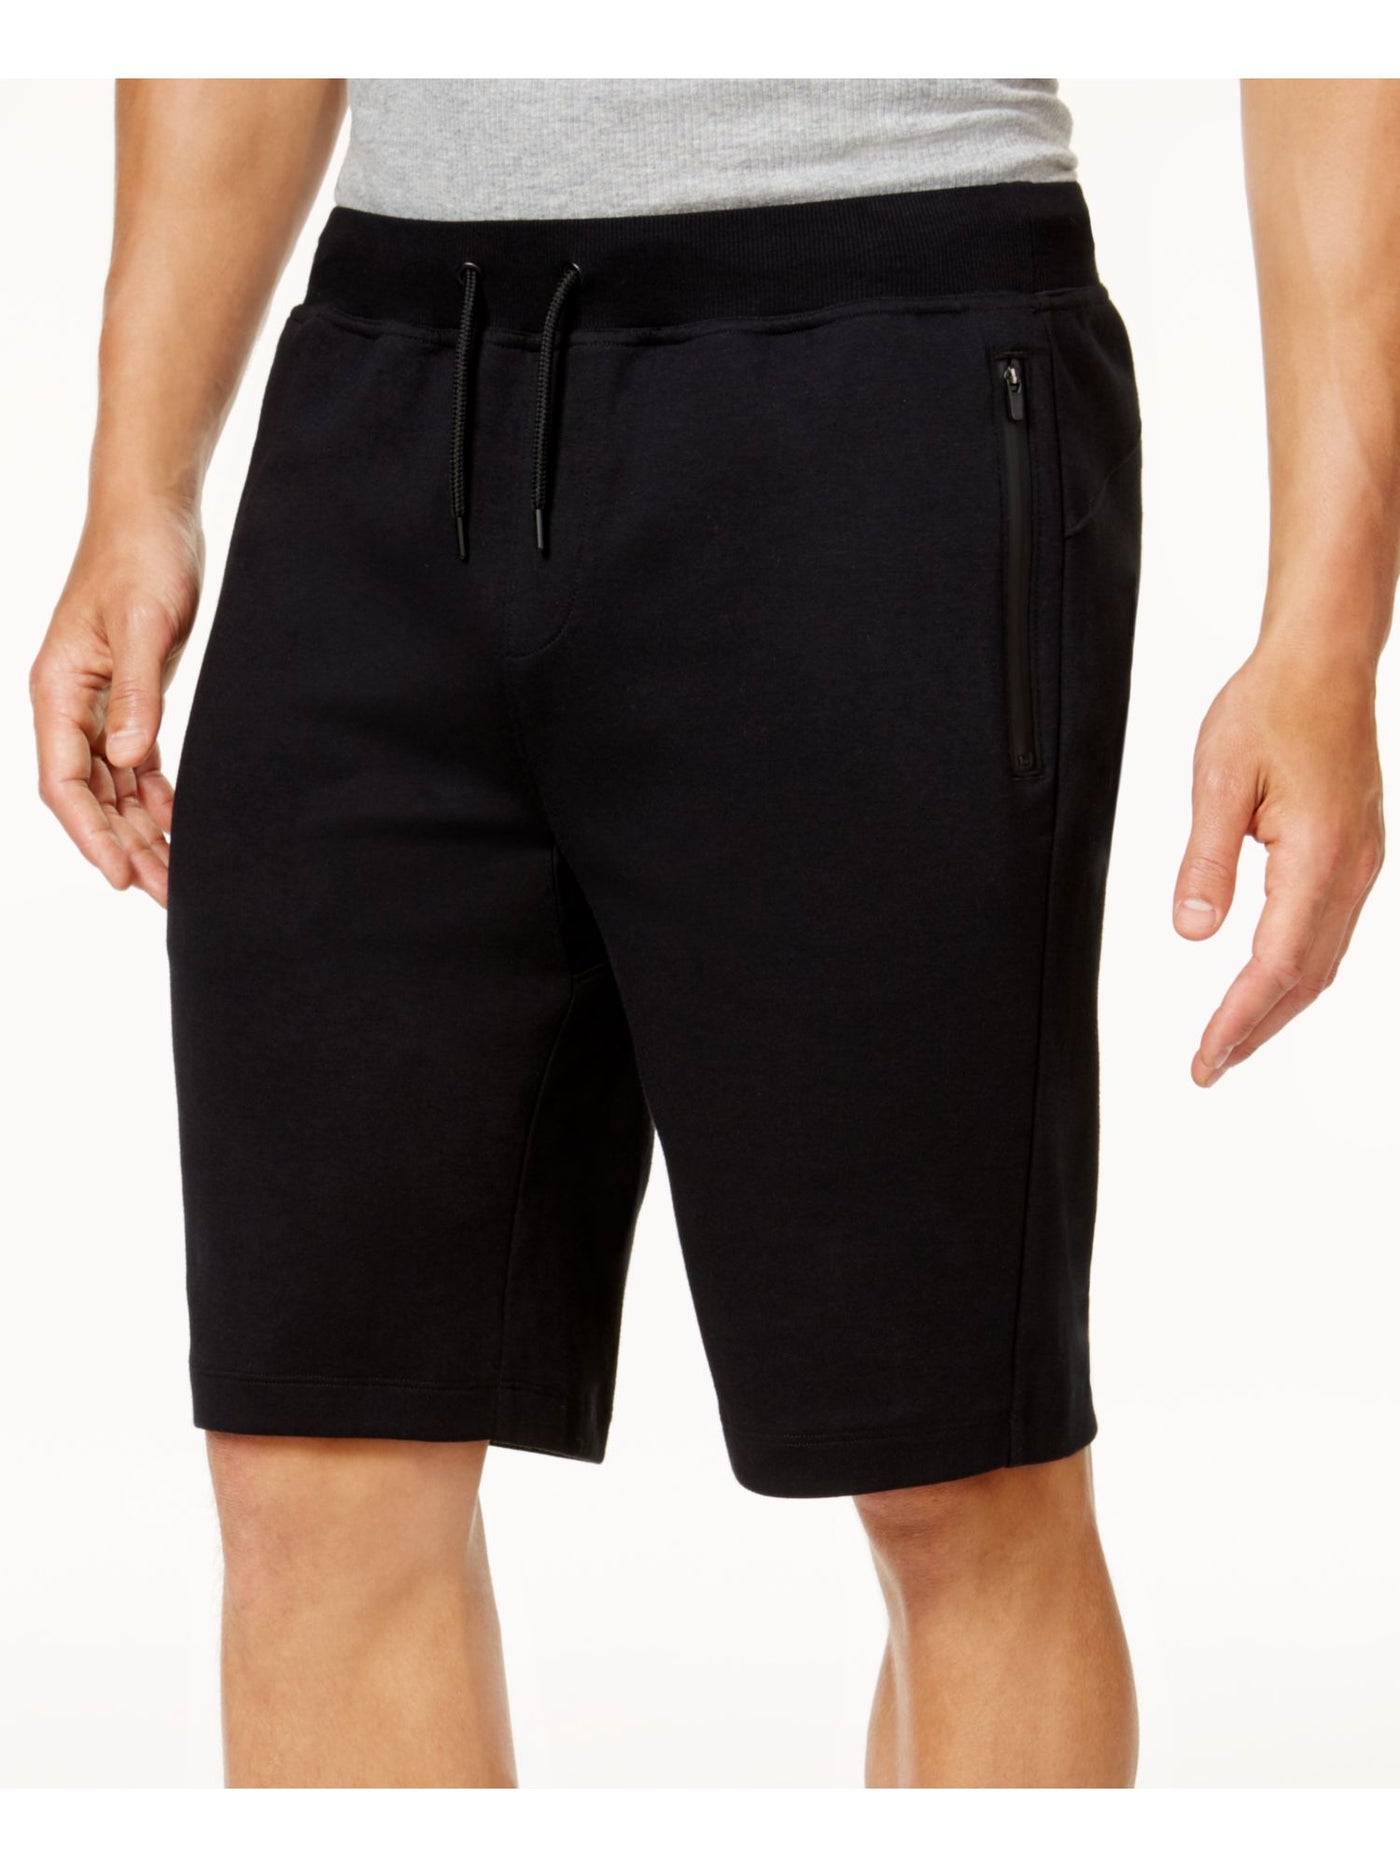 IDEOLOGY Mens Black Relaxed Fit Cotton Shorts M